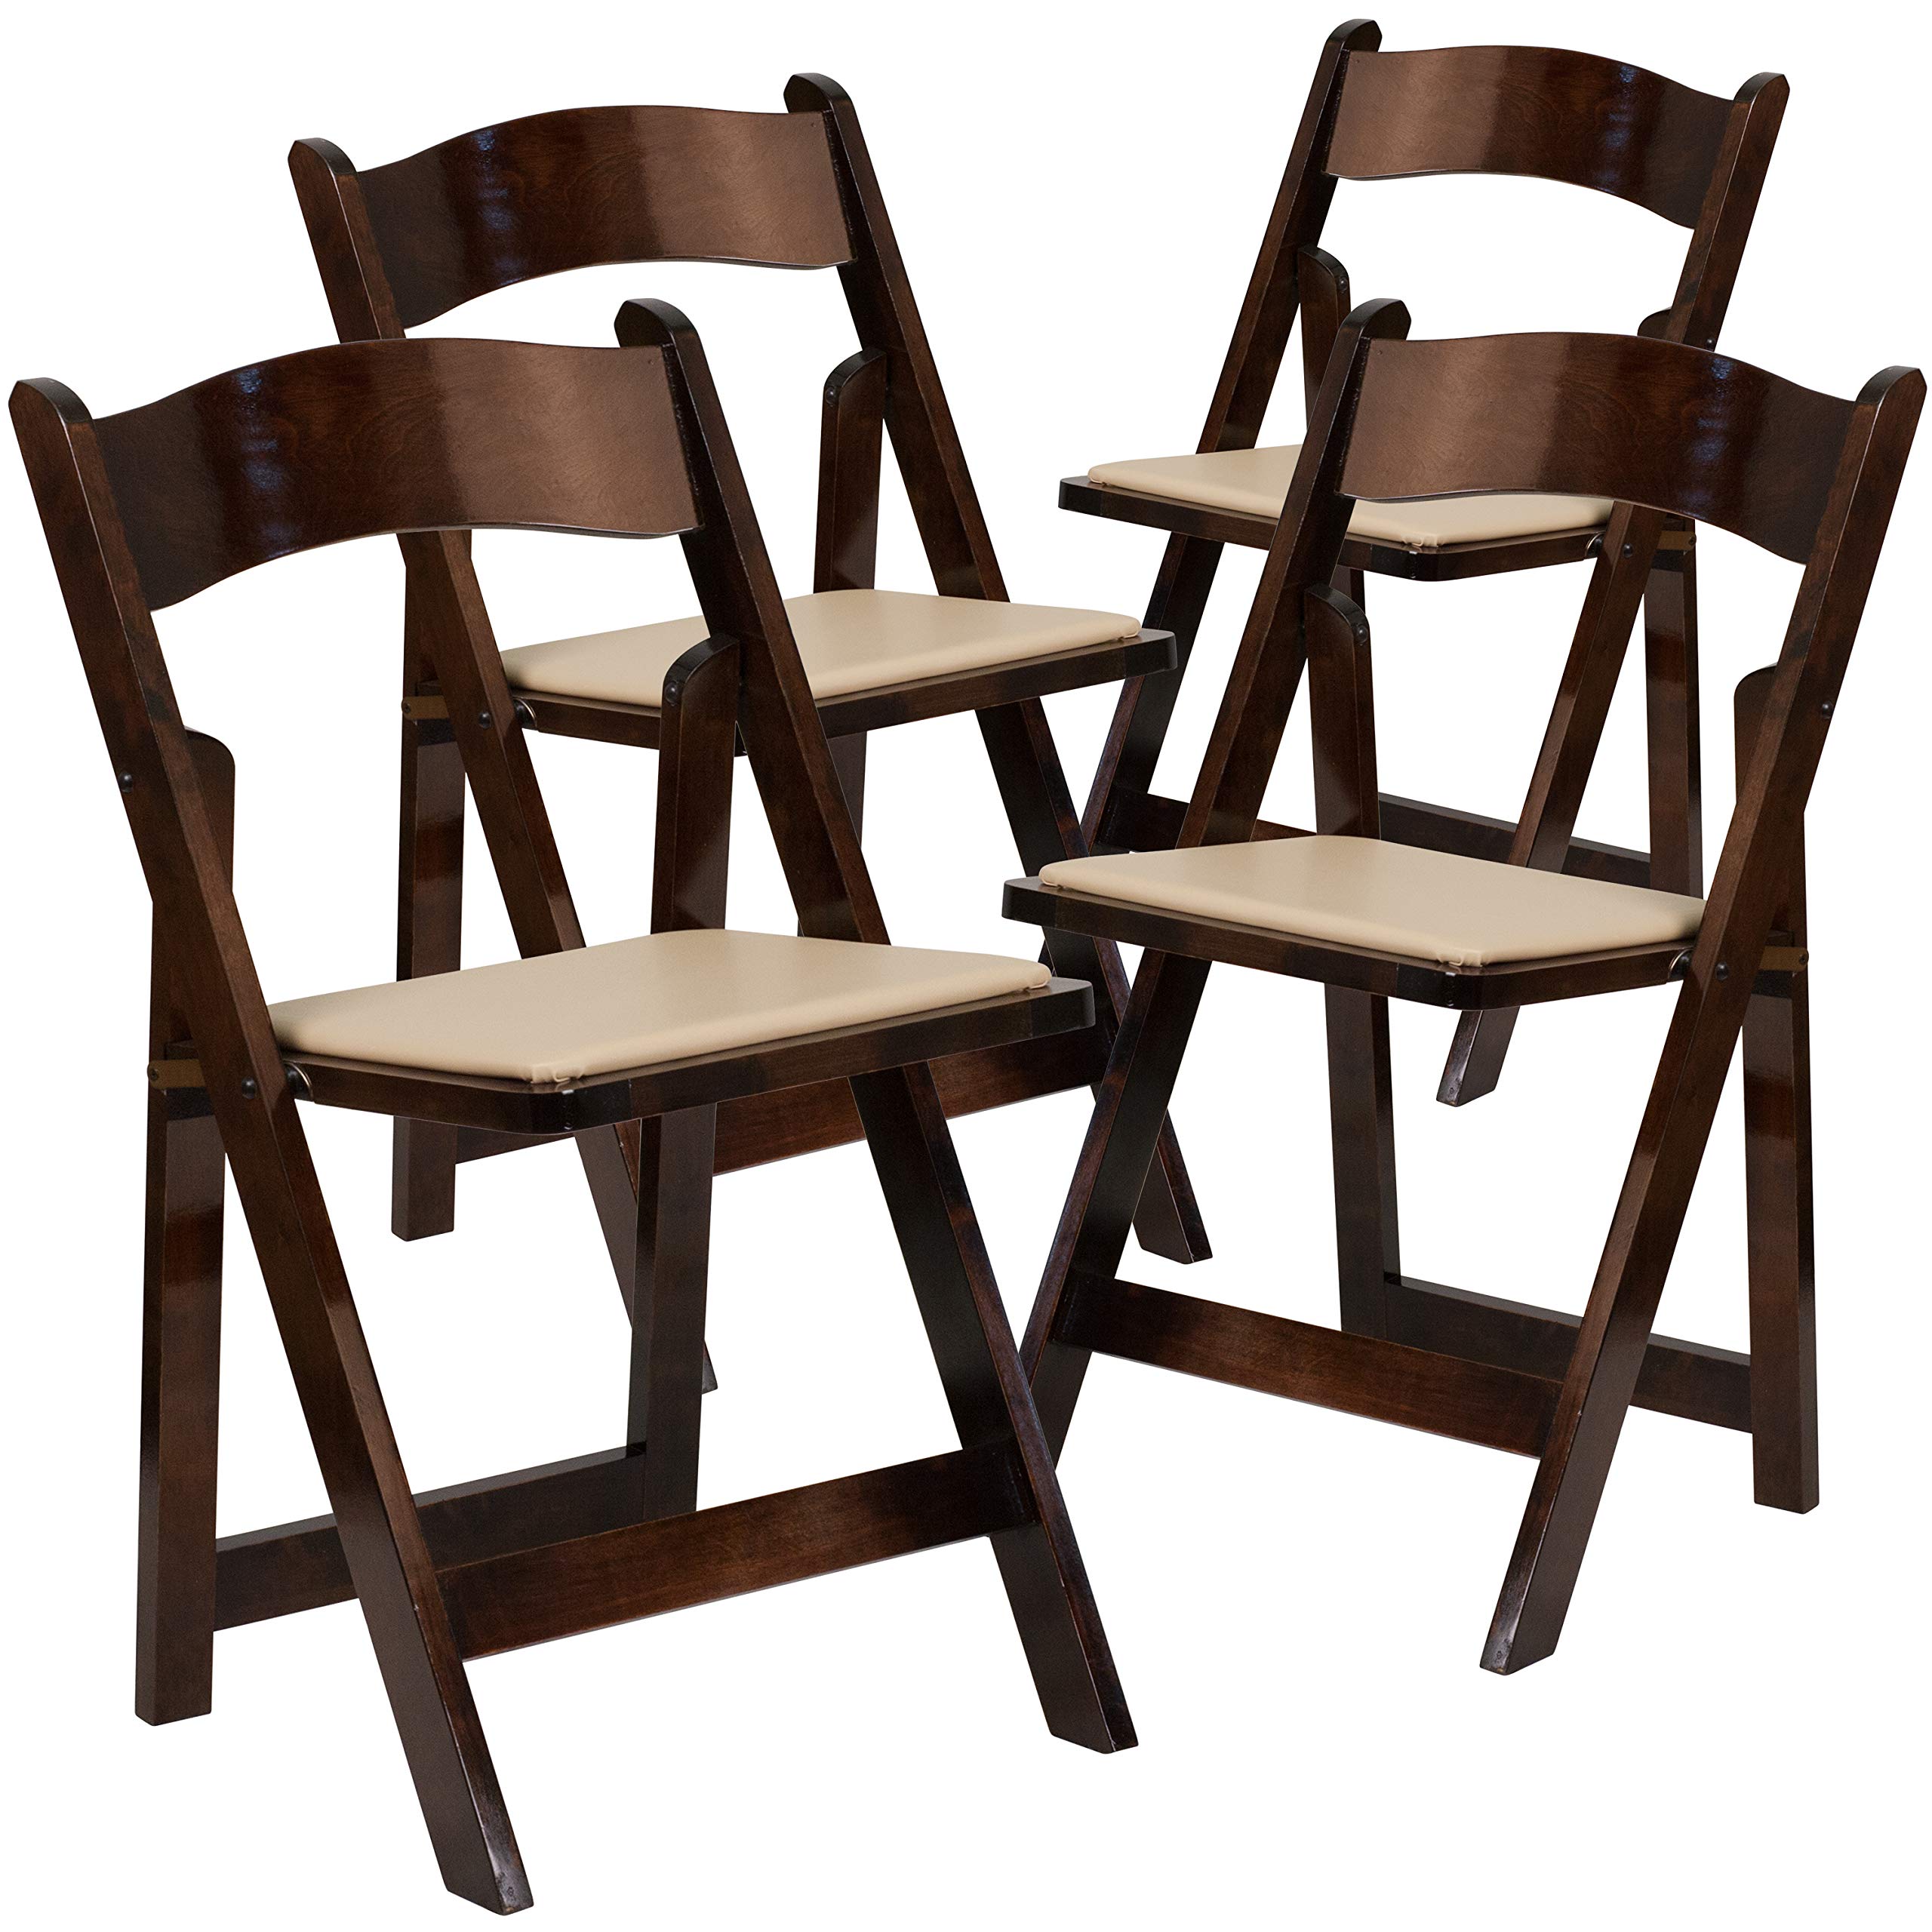 BizChair 4 Pack Fruitwood Wood Folding Chair with Detachable Vinyl Padded Seat